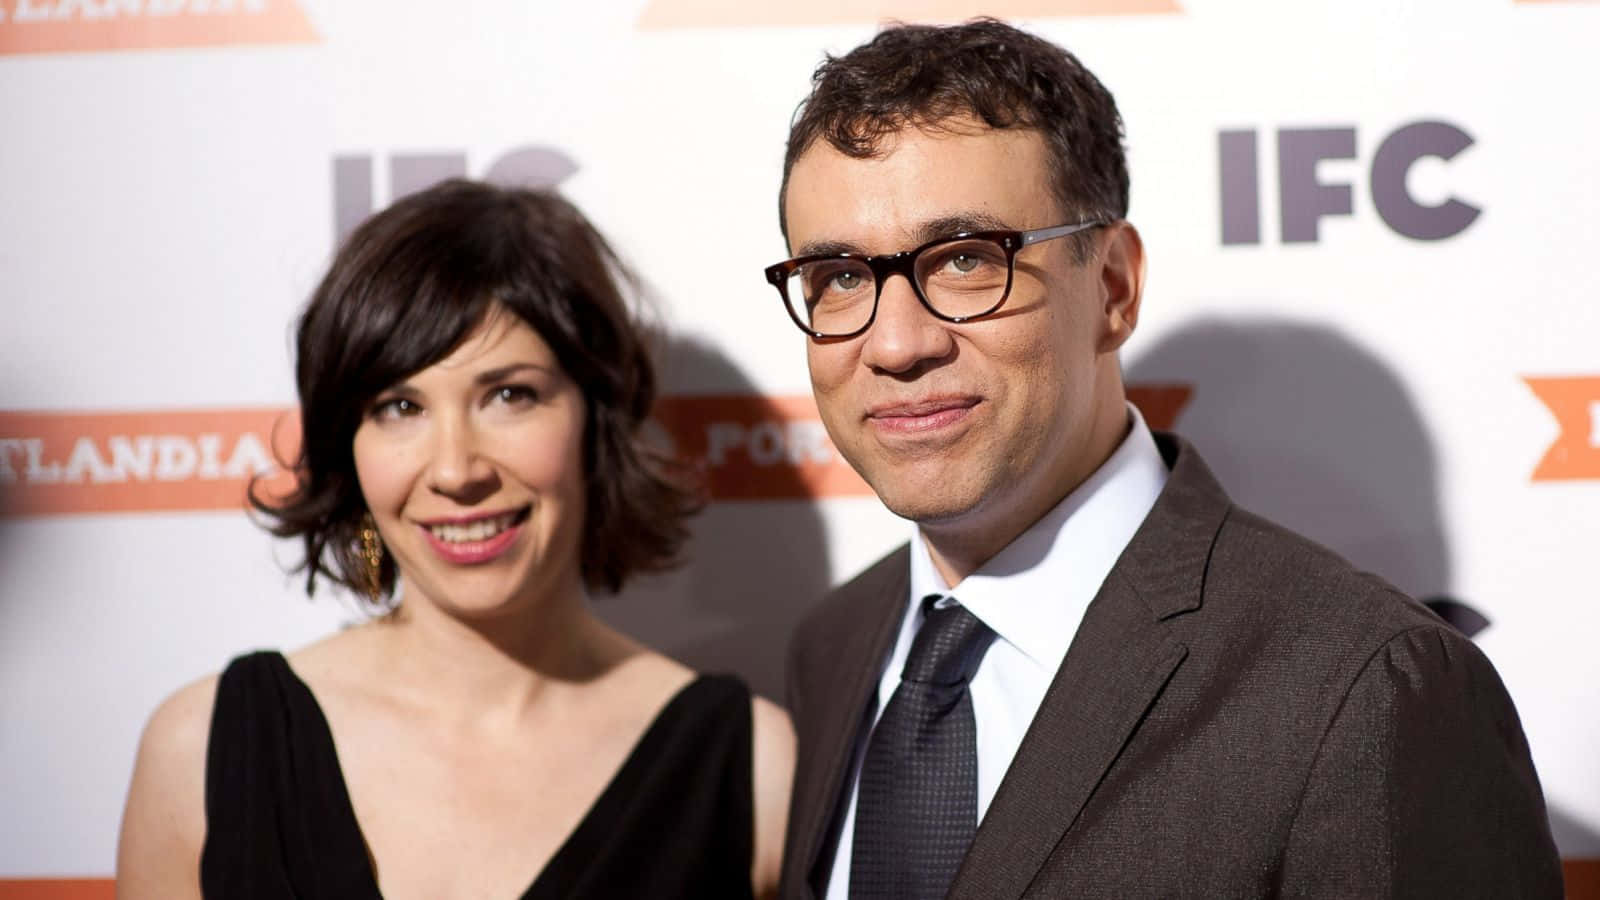 Fredarmisen Is An American Actor, Comedian, And Musician. He Is Best Known For His Work On The Sketch Comedy Show 